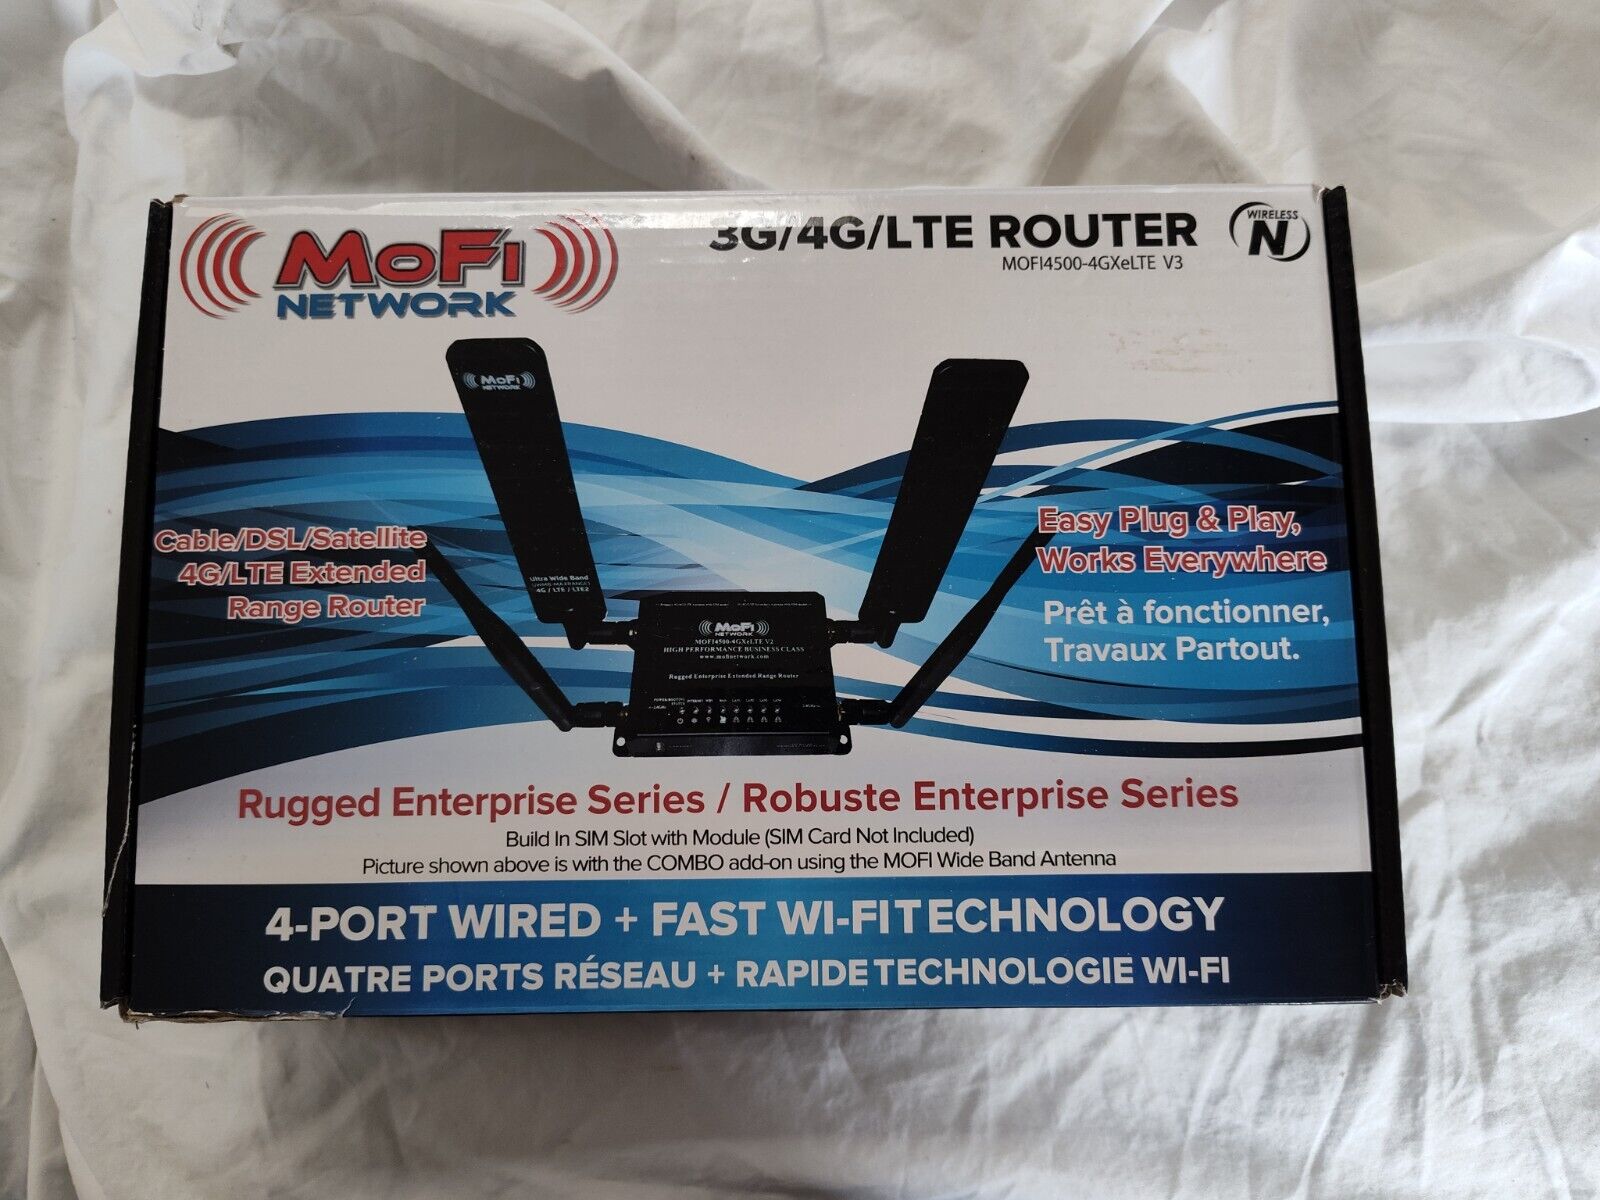 MoFi Network 3G/4G/LTE Cable DSL Satellite Cell Router- NEW in box